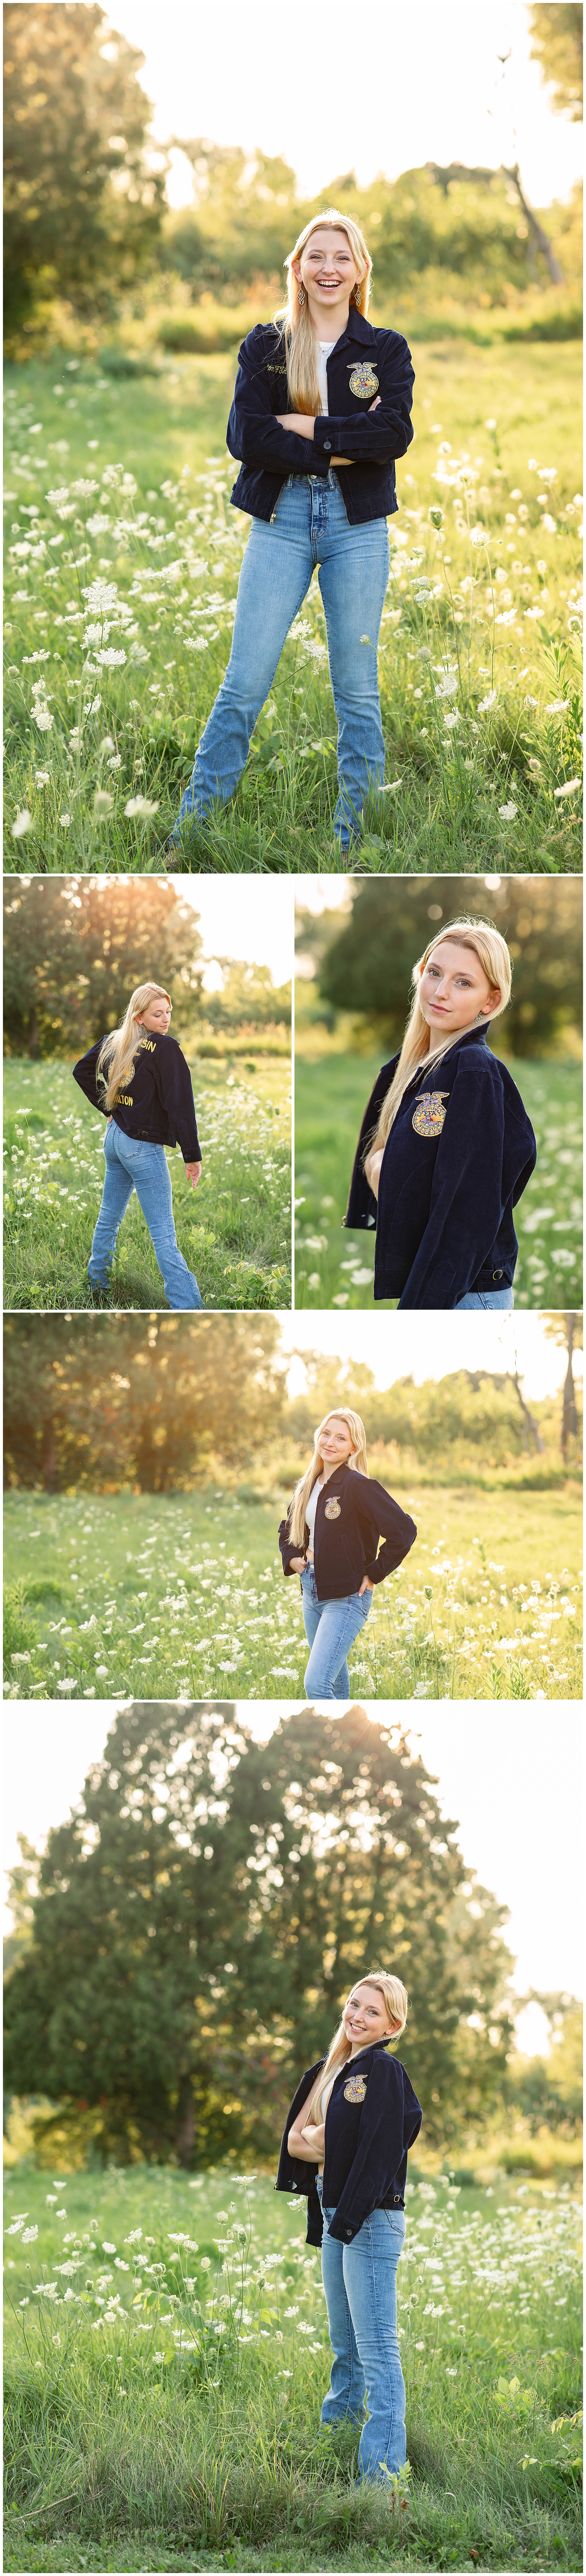 Senior photos with FFA jacket and denim jeans in a field of wild flowers at sunset 